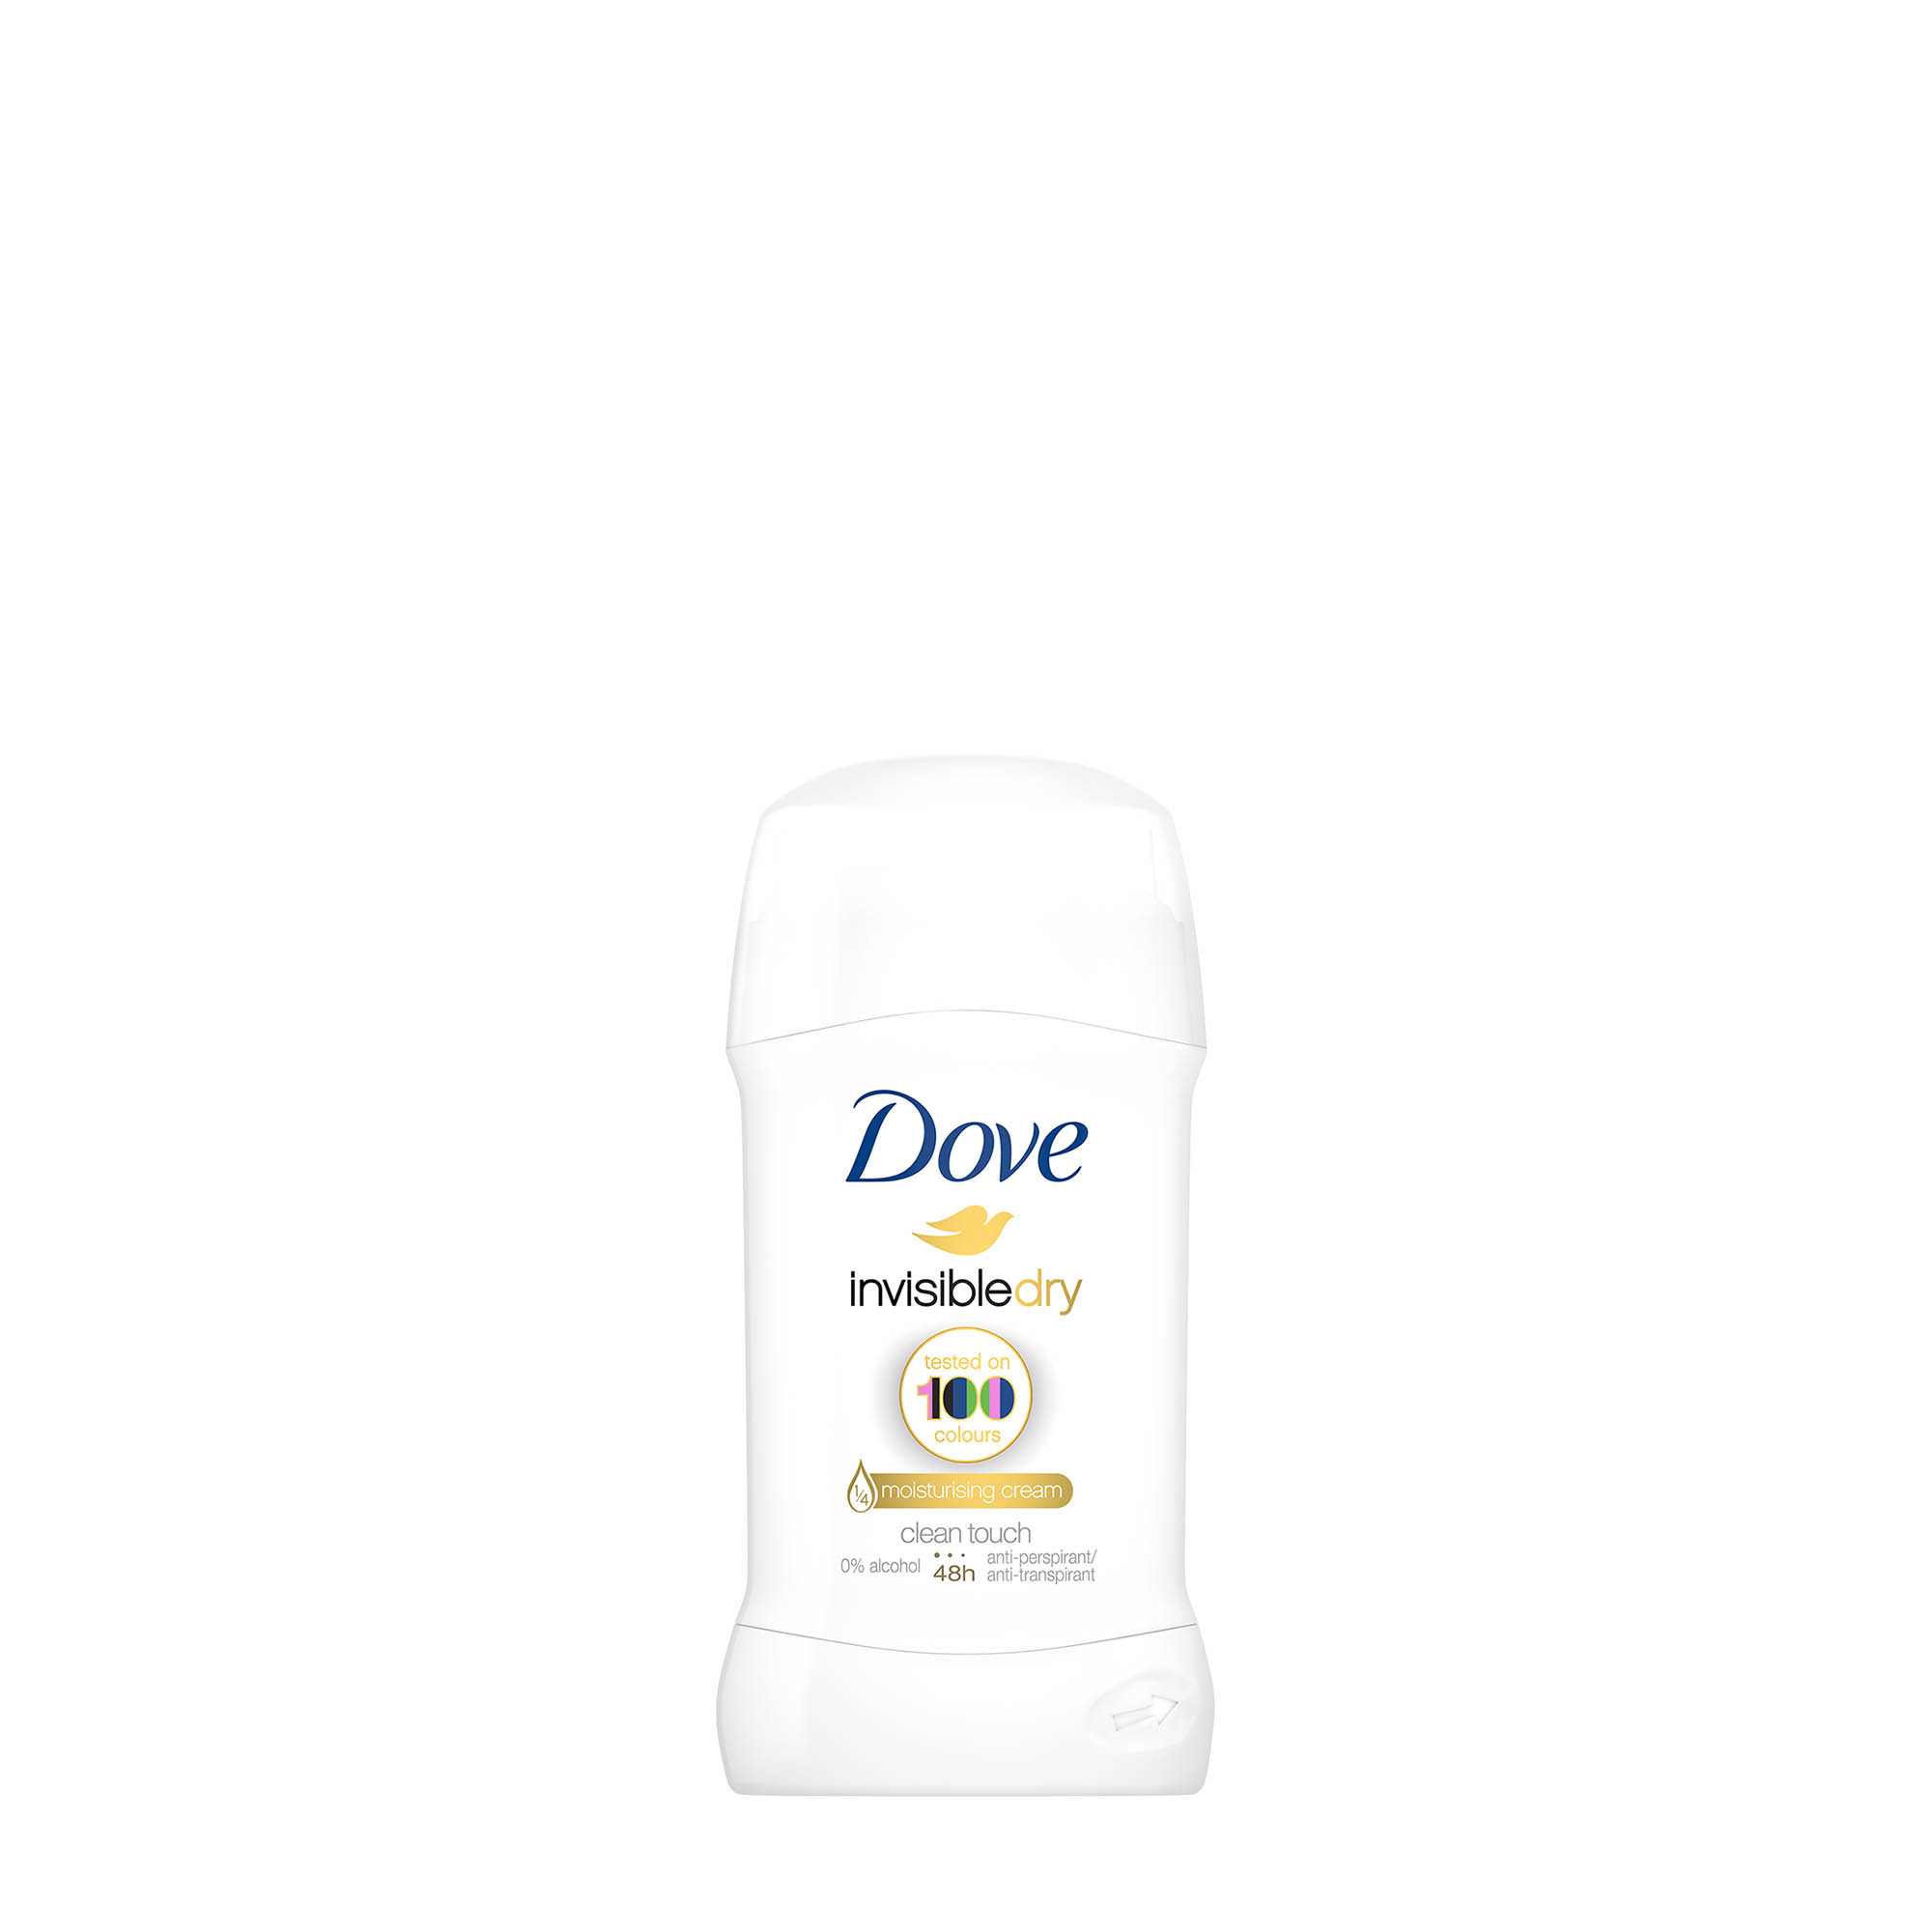 Dove Deodorant invisible dry clean touch 48h anti-perspirant, 40 mL – Peppery Spot